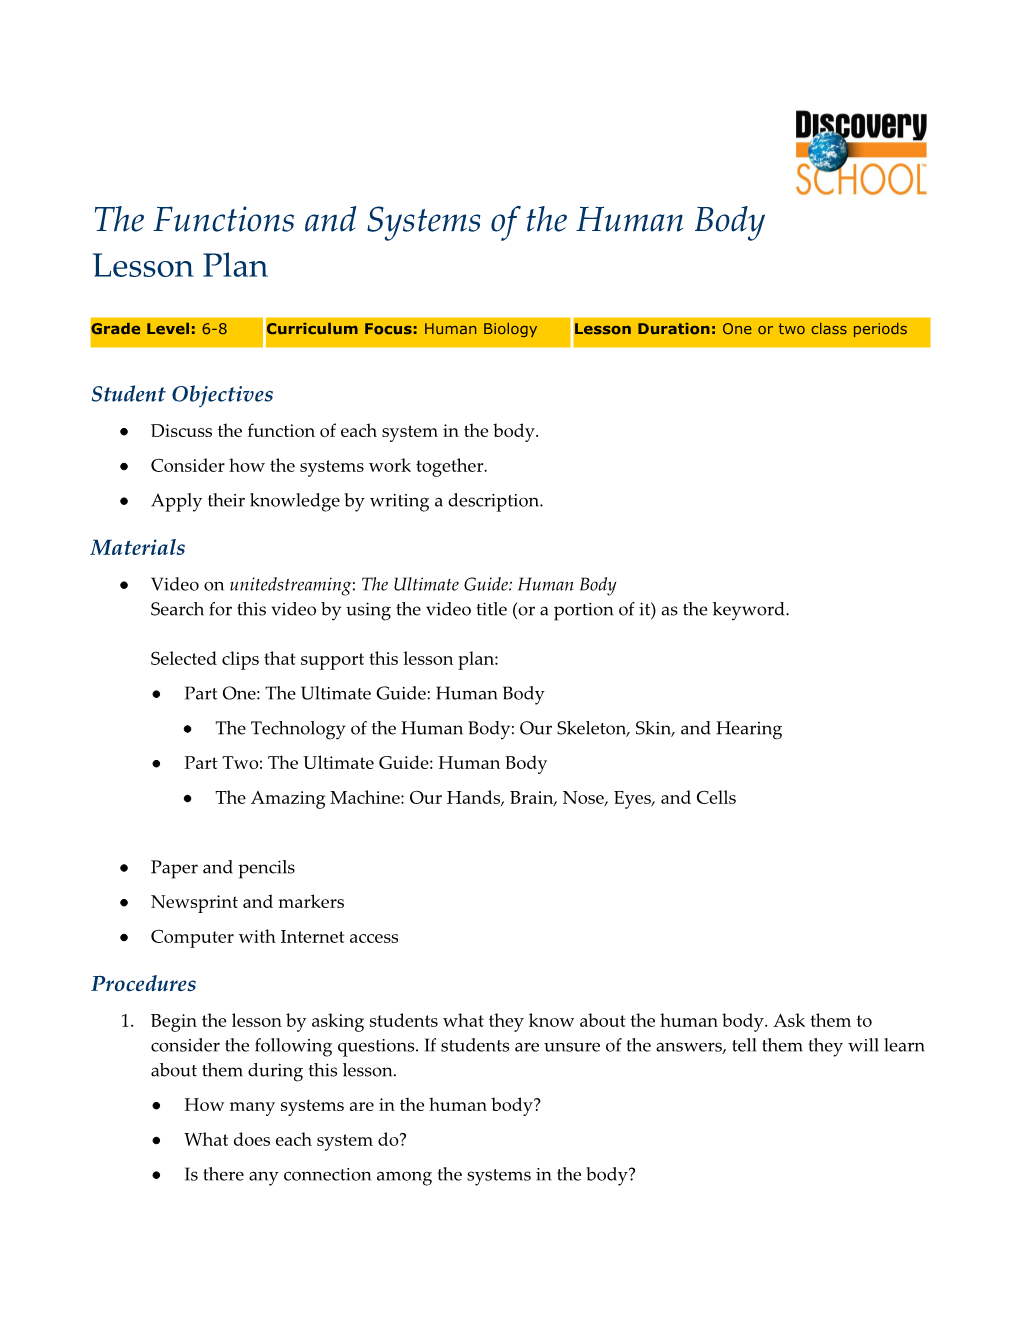 The Functions and Systems of the Human Body